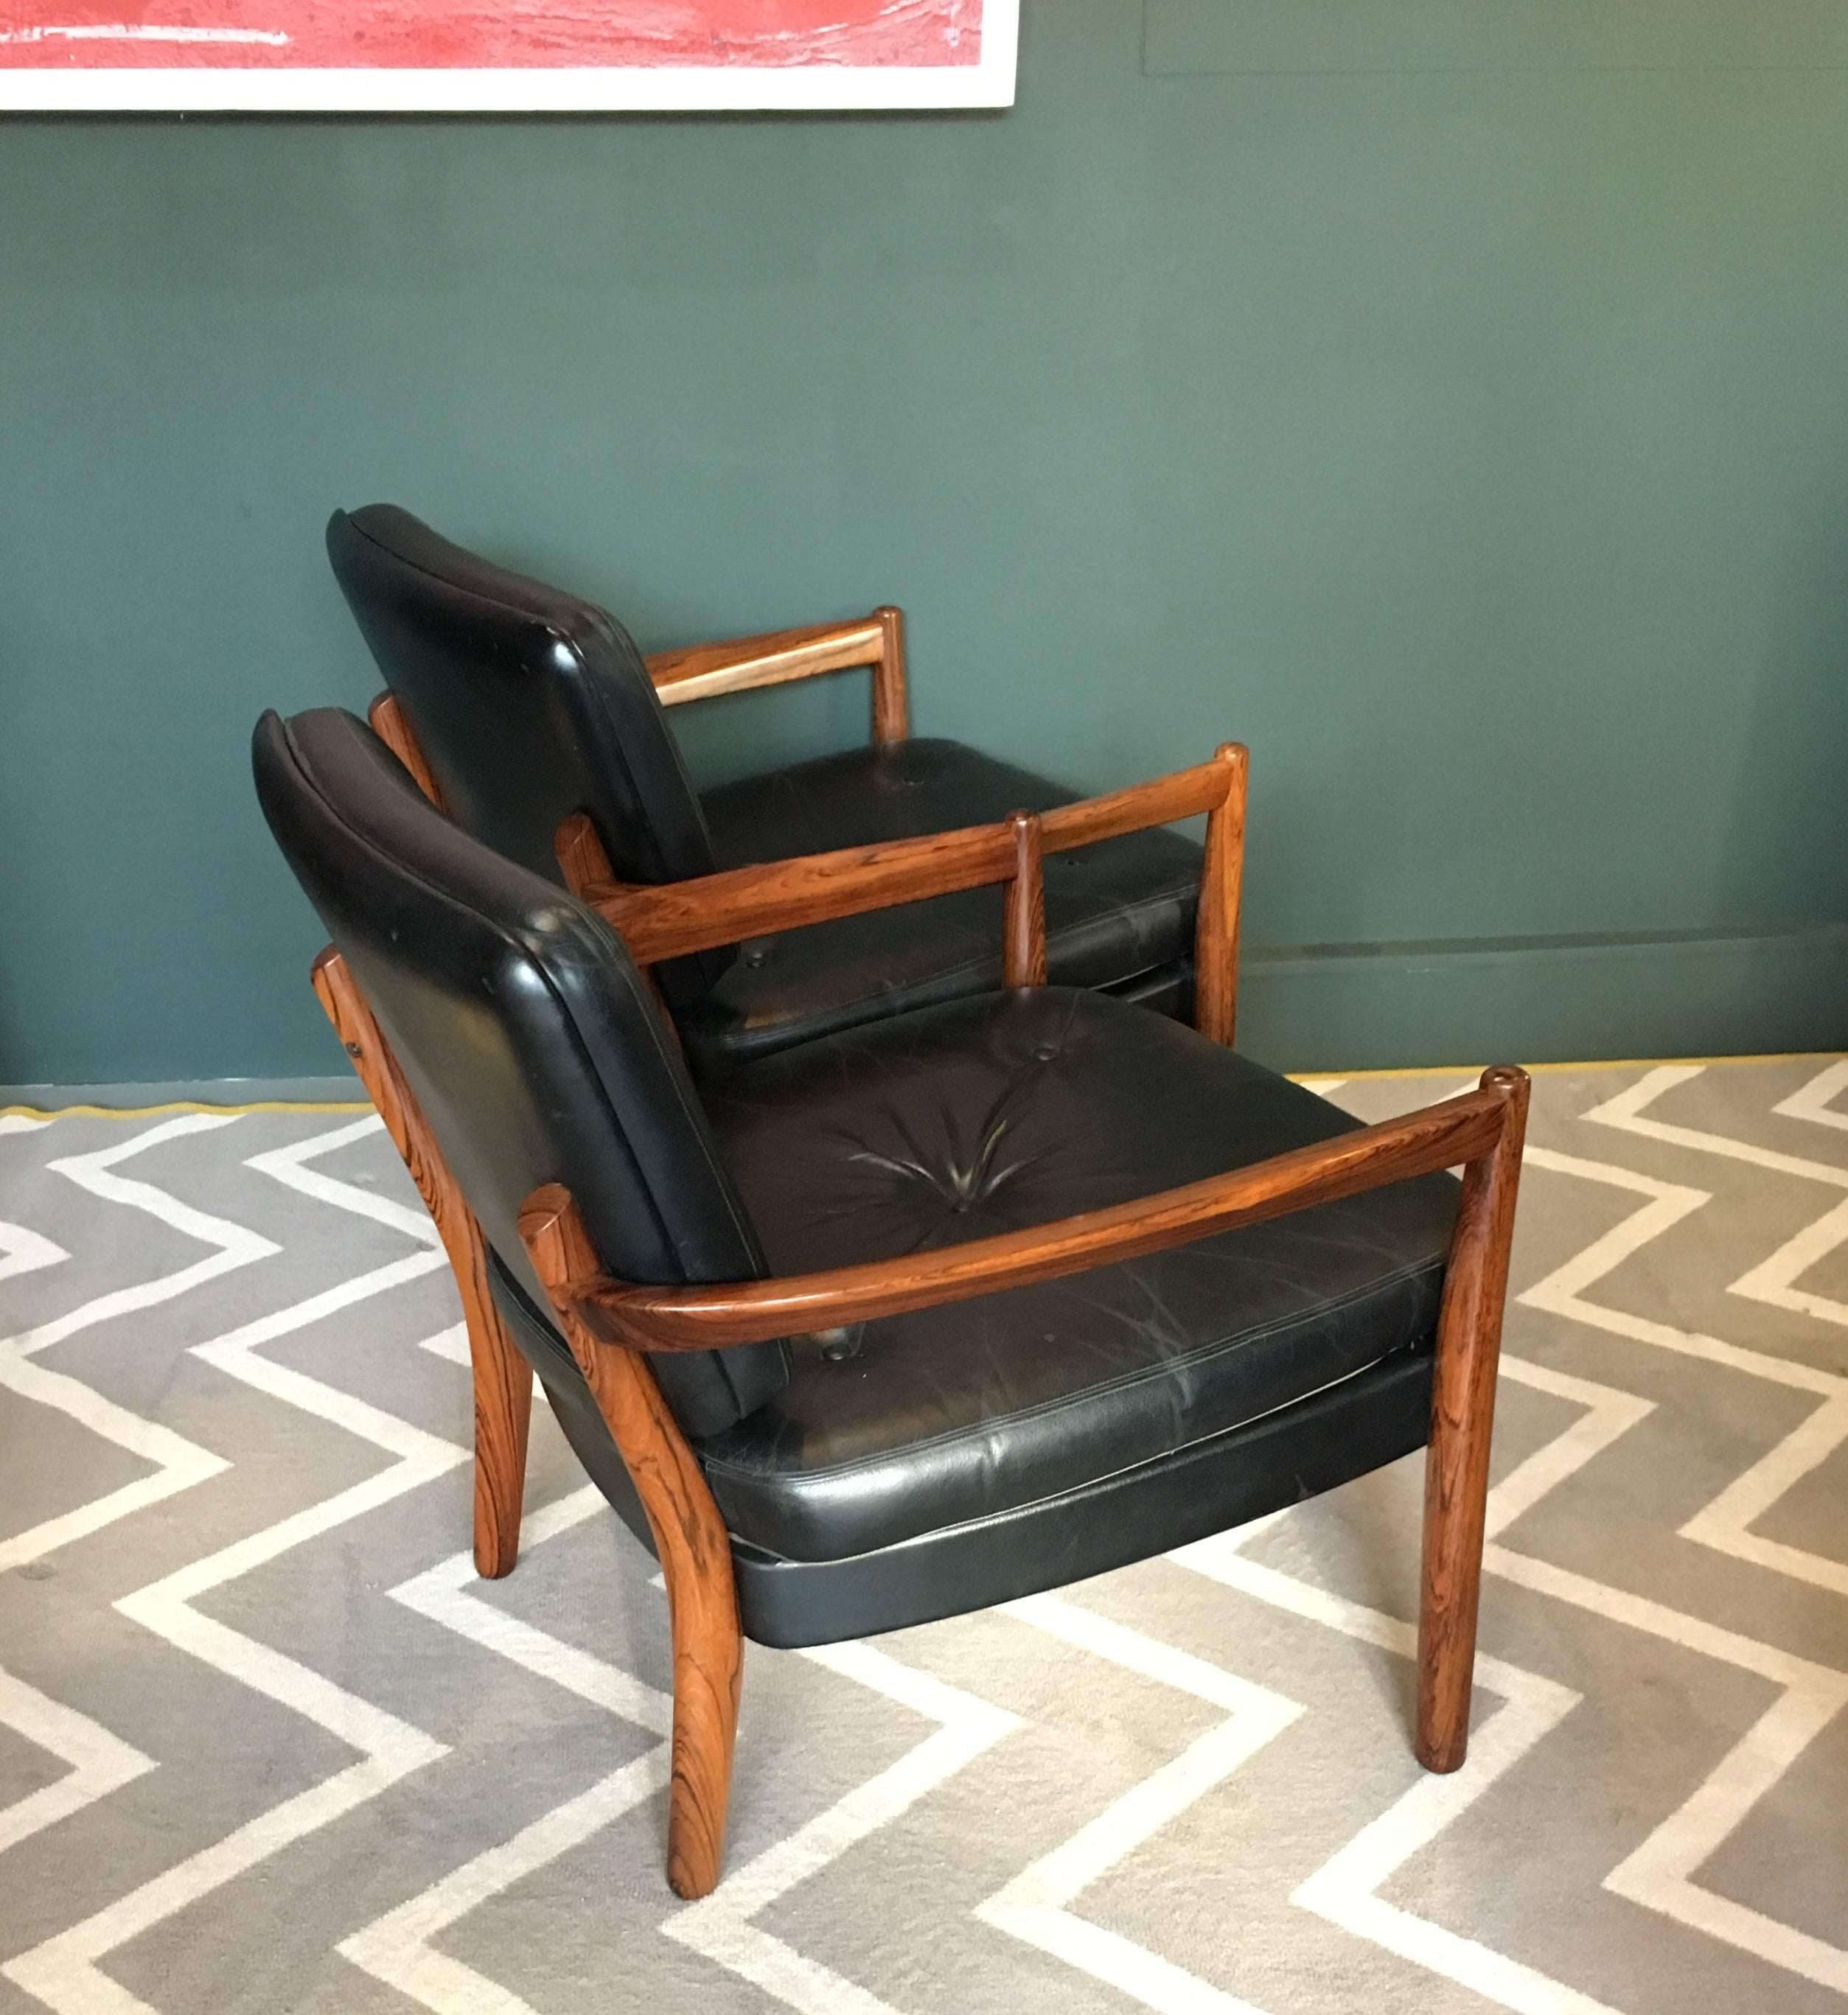 Highly unusual matching pair of Scandinavian lounge chairs. Finest quality rosewood frames upholstered in original black leather. Produced in the early 1960s in Norway. Superb and unusual design style and construction.
We can reupholster if